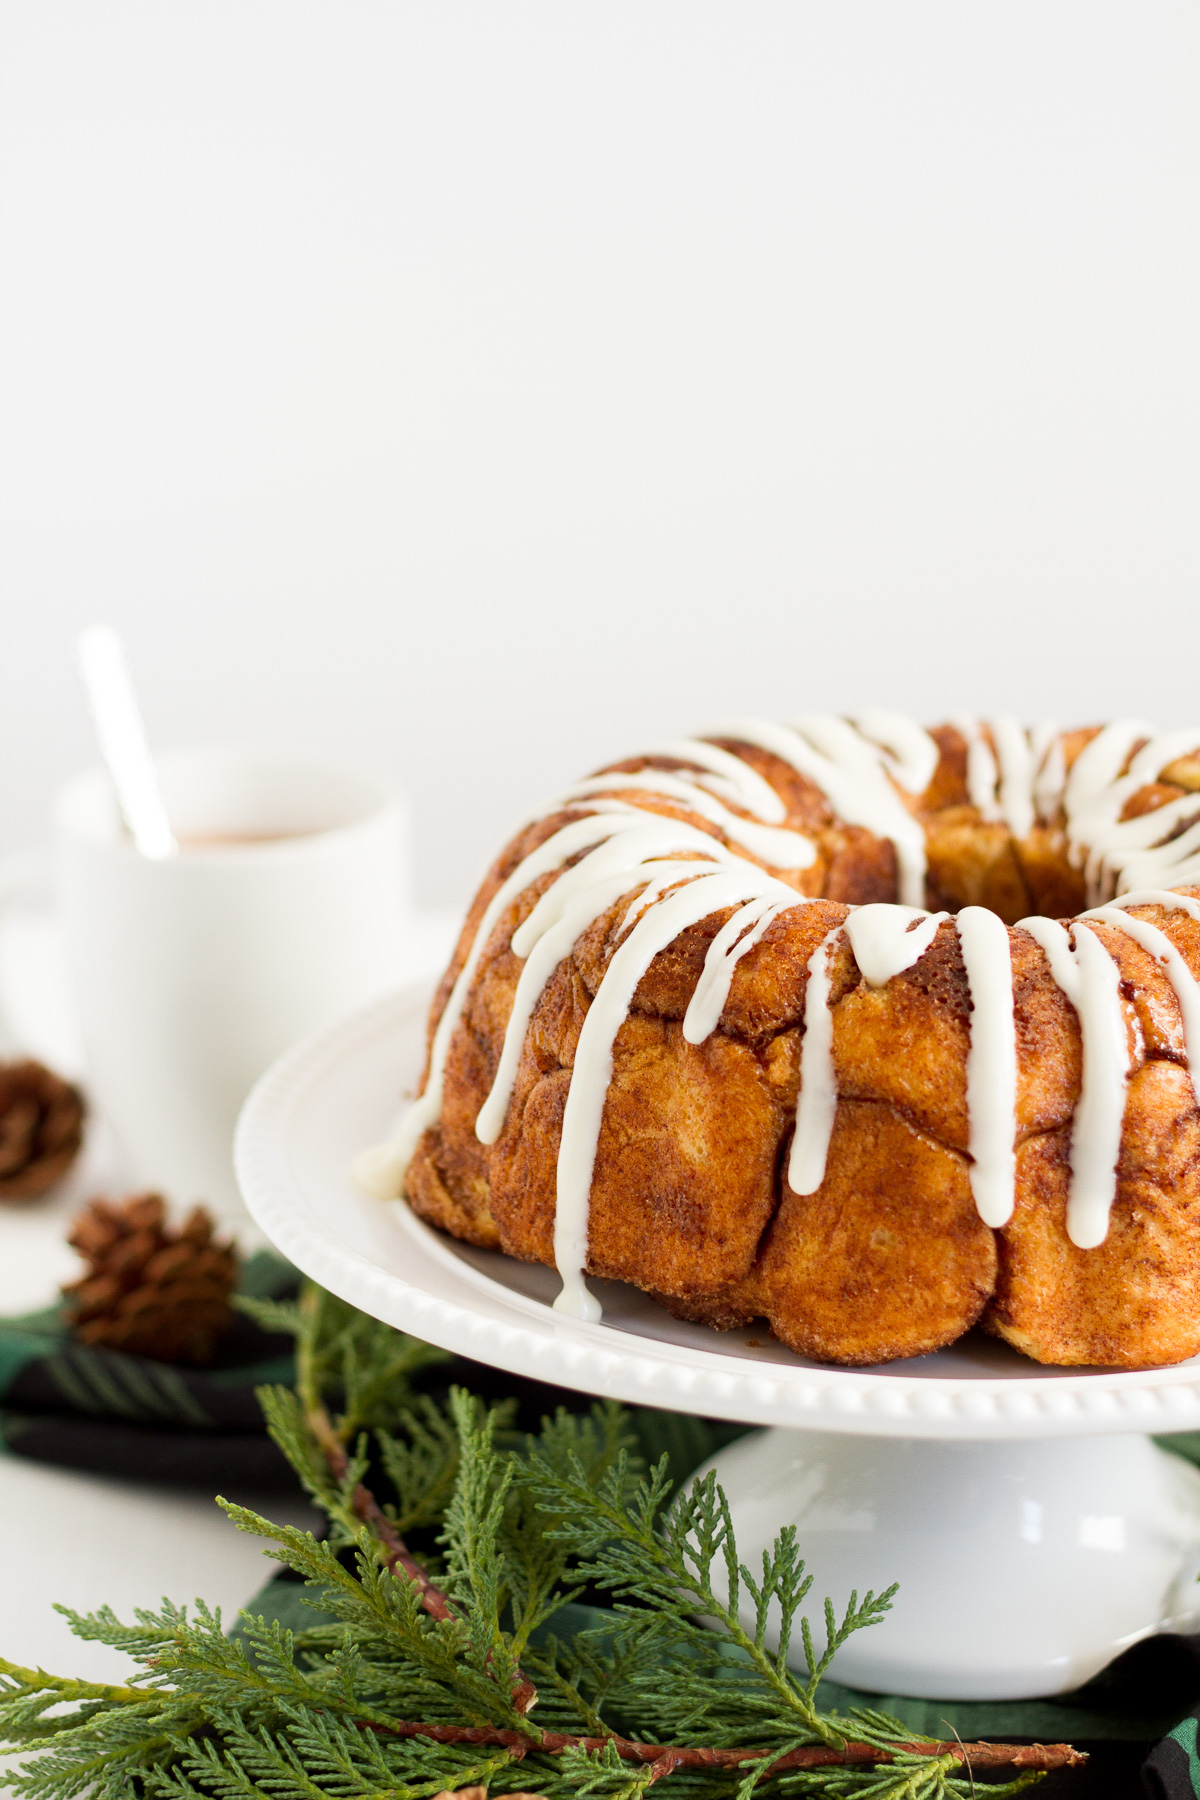 Warm, buttery, and covered in sweet cinnamon and sugar, this delicious homemade monkey bread is the perfect treat for chilly weather.